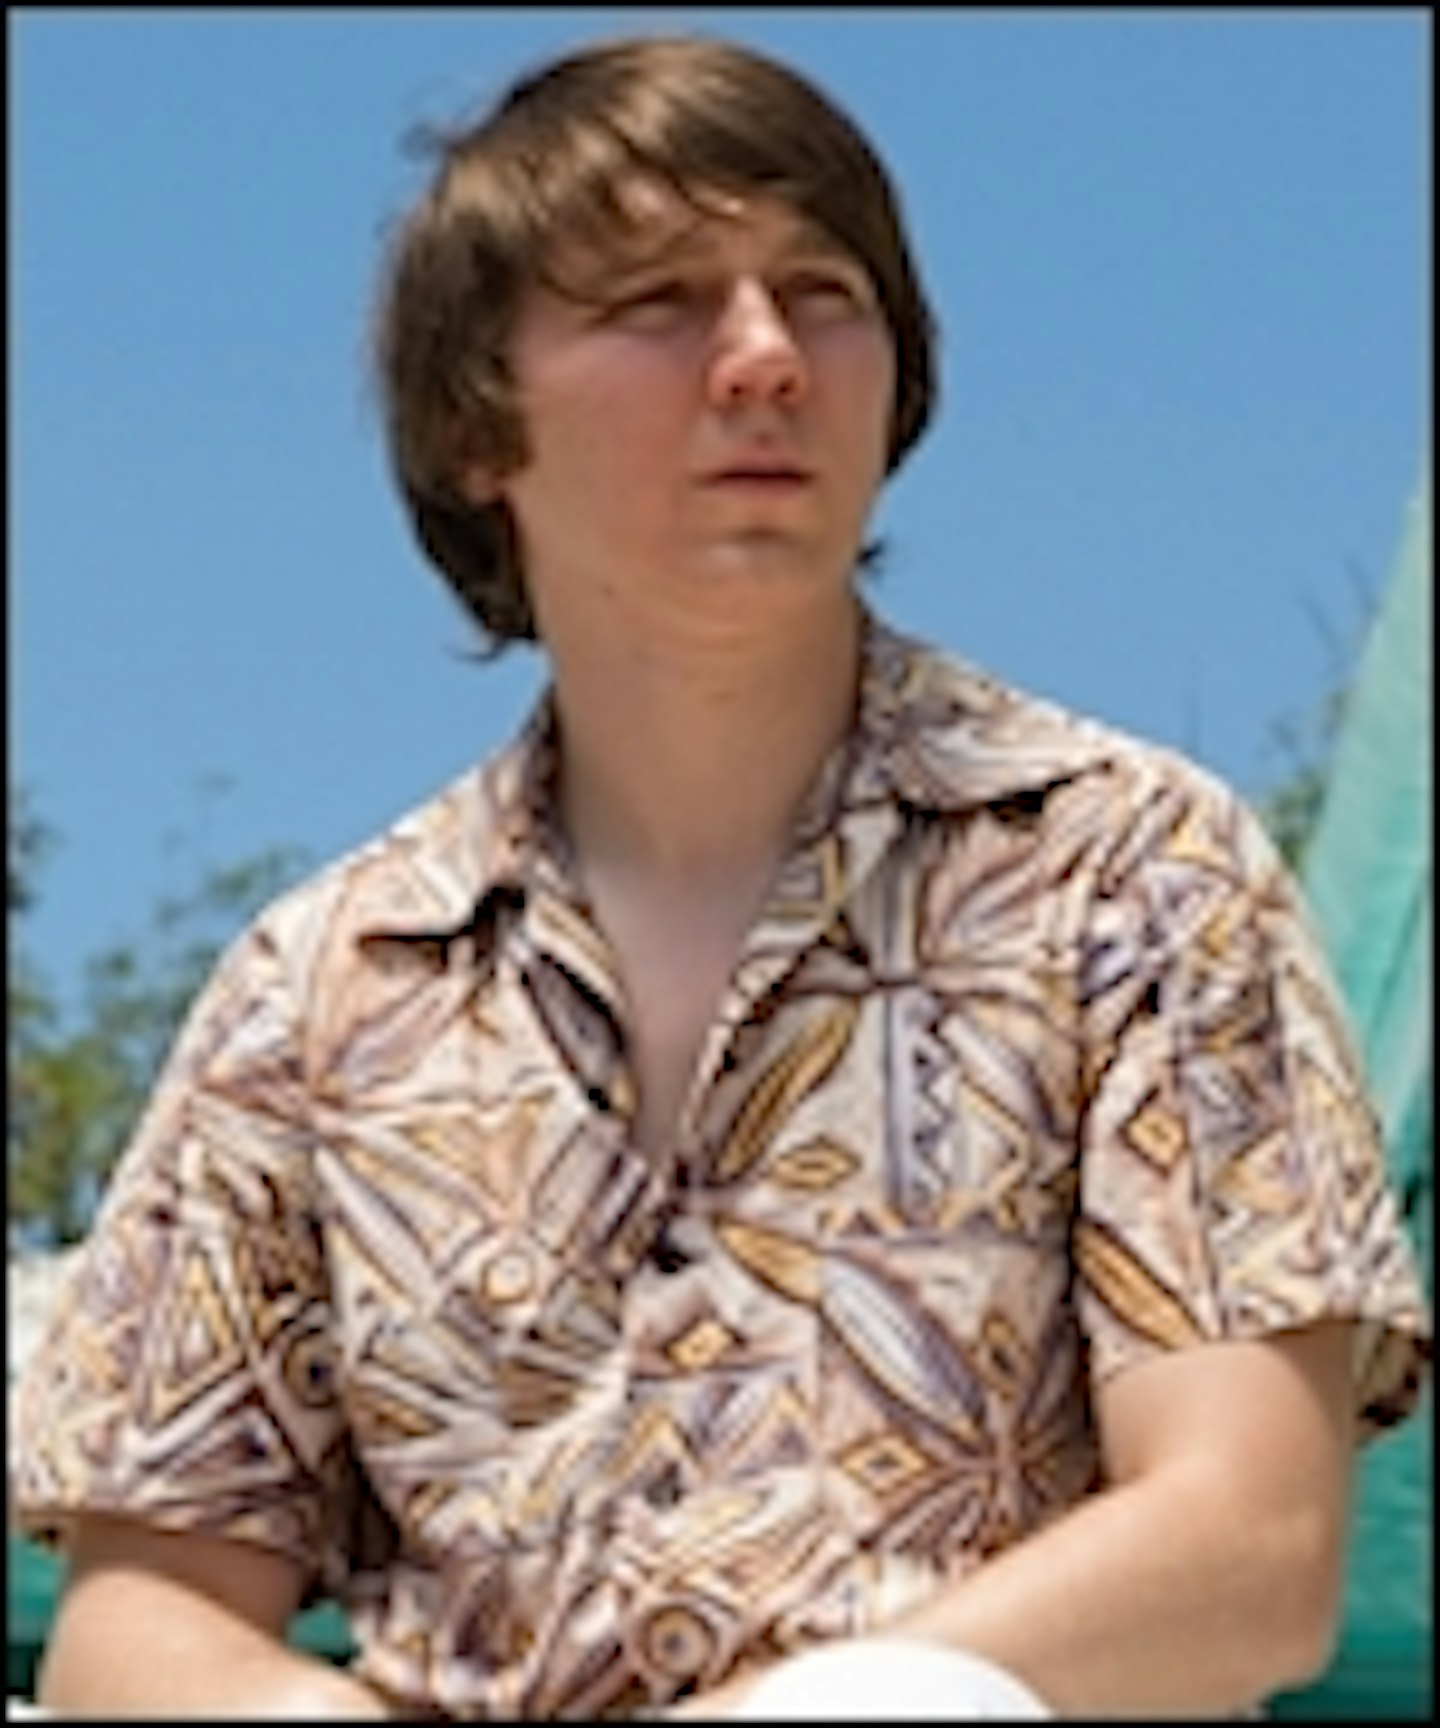 First Trailer For Love & Mercy